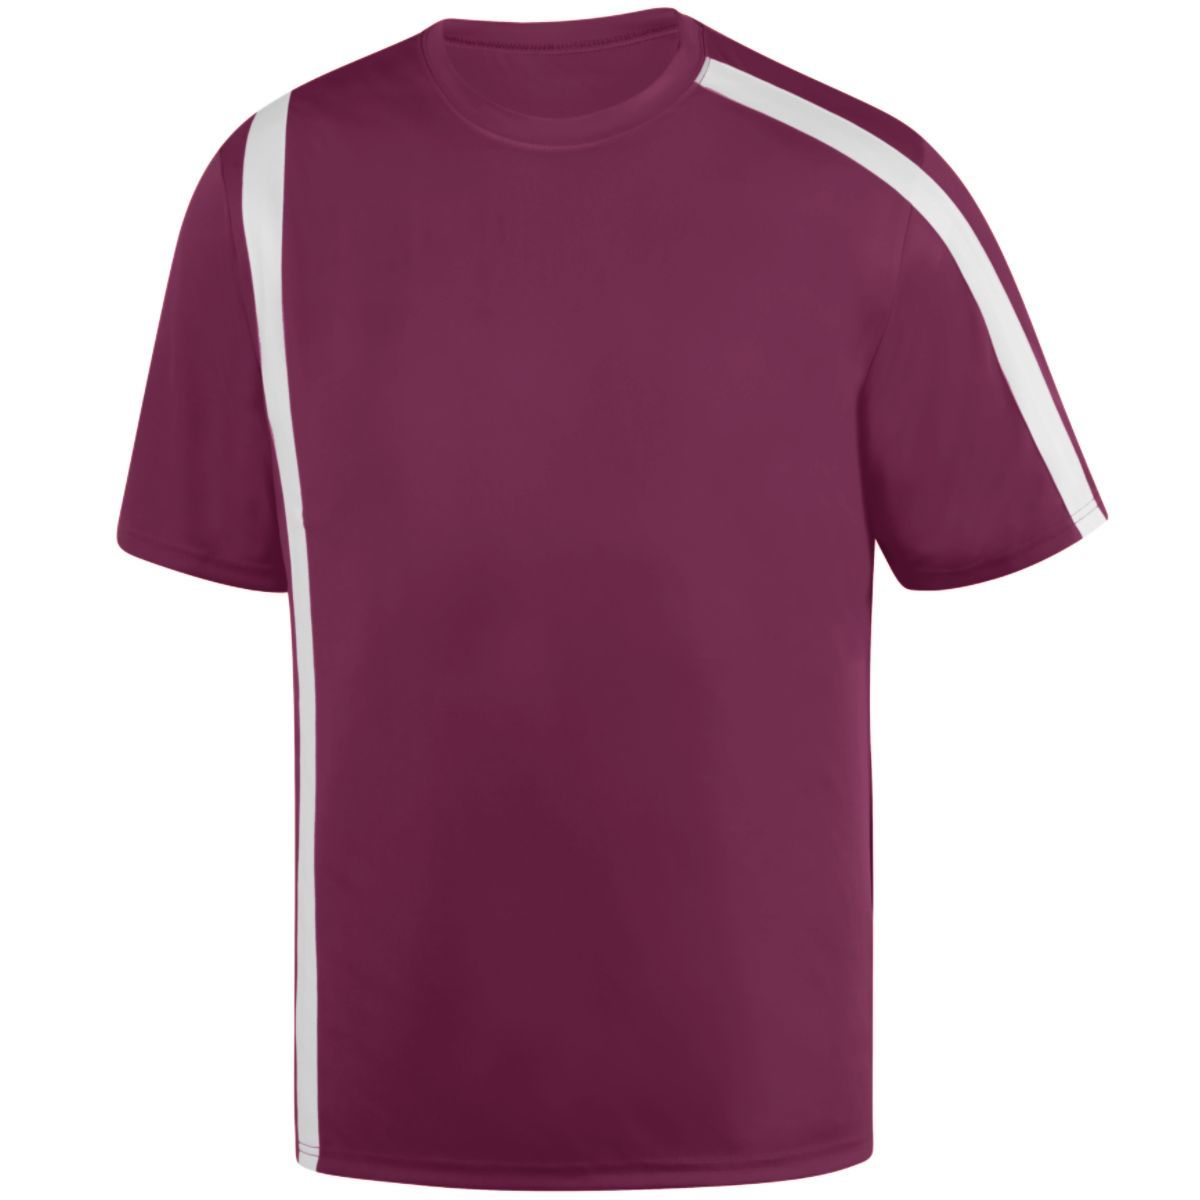 Augusta Sportswear Attacking Third Jersey in Maroon/White  -Part of the Adult, Adult-Jersey, Augusta-Products, Soccer, Shirts, All-Sports-1 product lines at KanaleyCreations.com